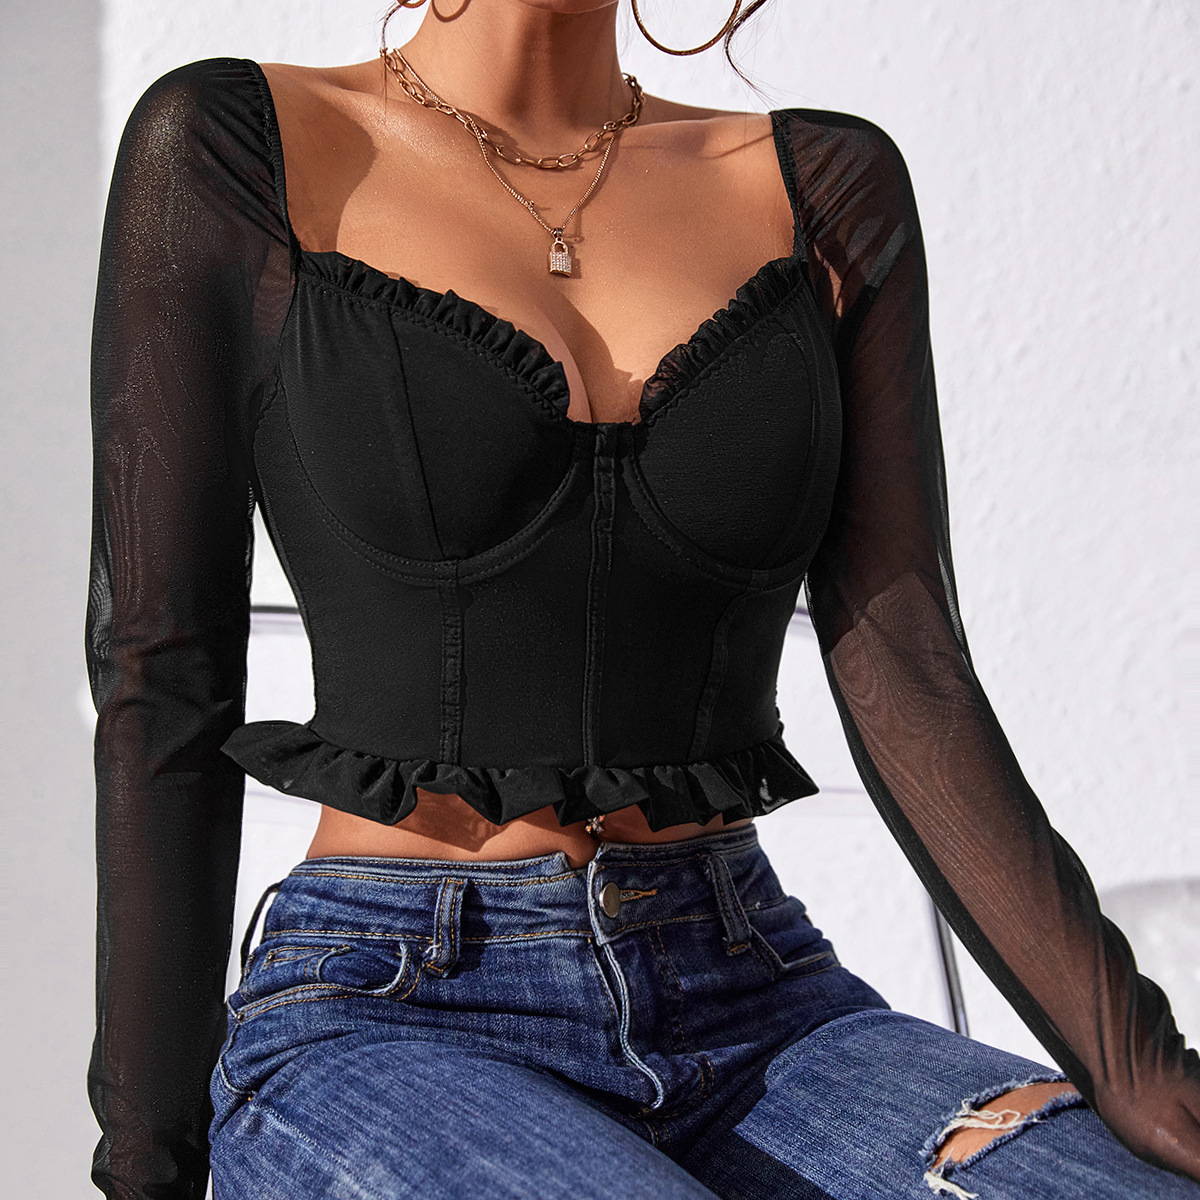 Rims low-cut European style sexy tops for women